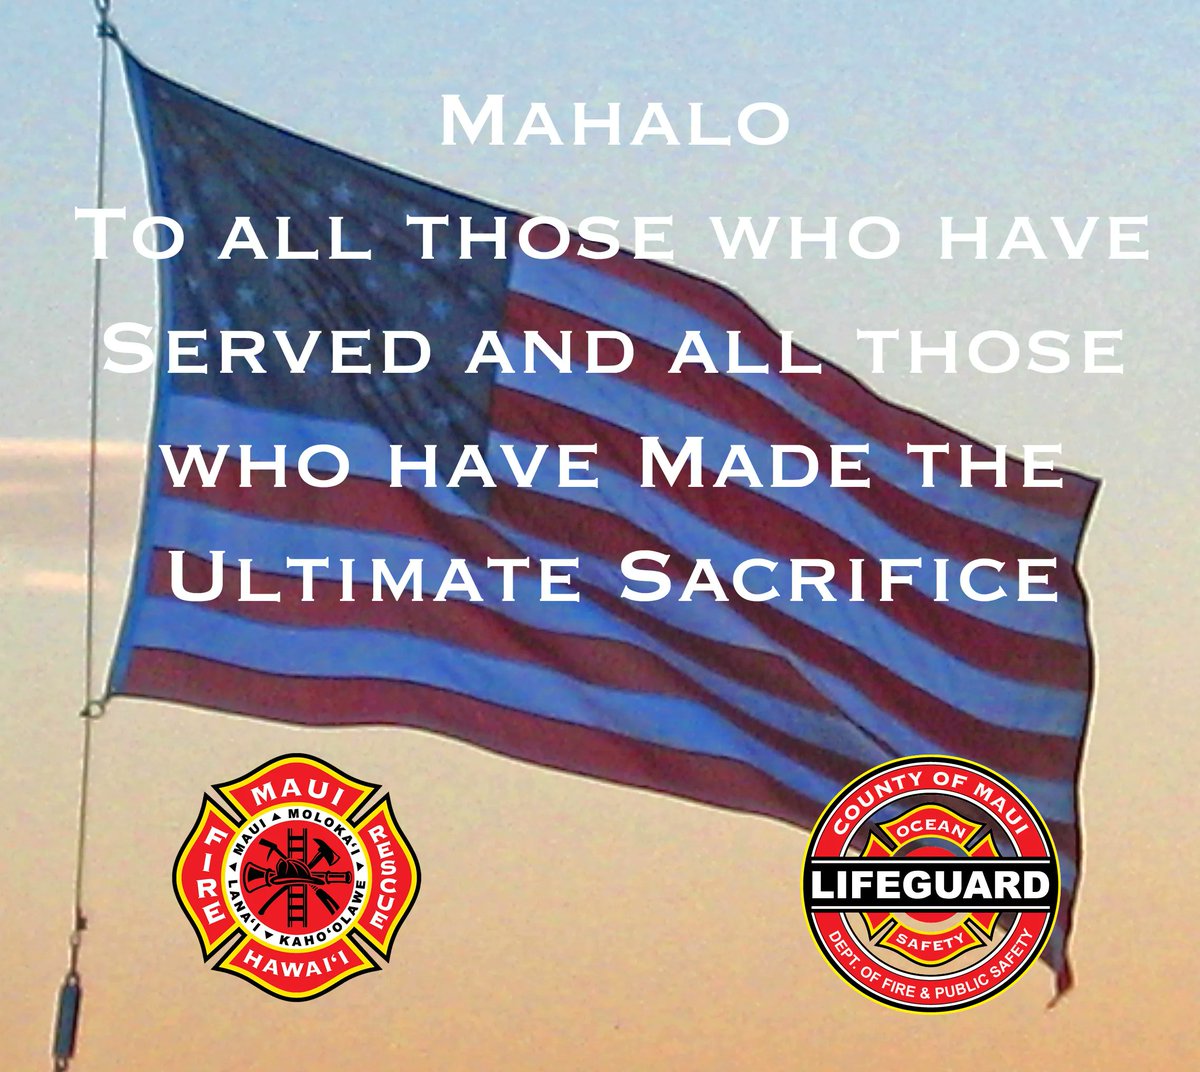 Remember why we have this holiday.  

Show your appreciation to those who have made the ultimate sacrifice.

#MemorialDay #community #ohana #liveliketre #sacrifice